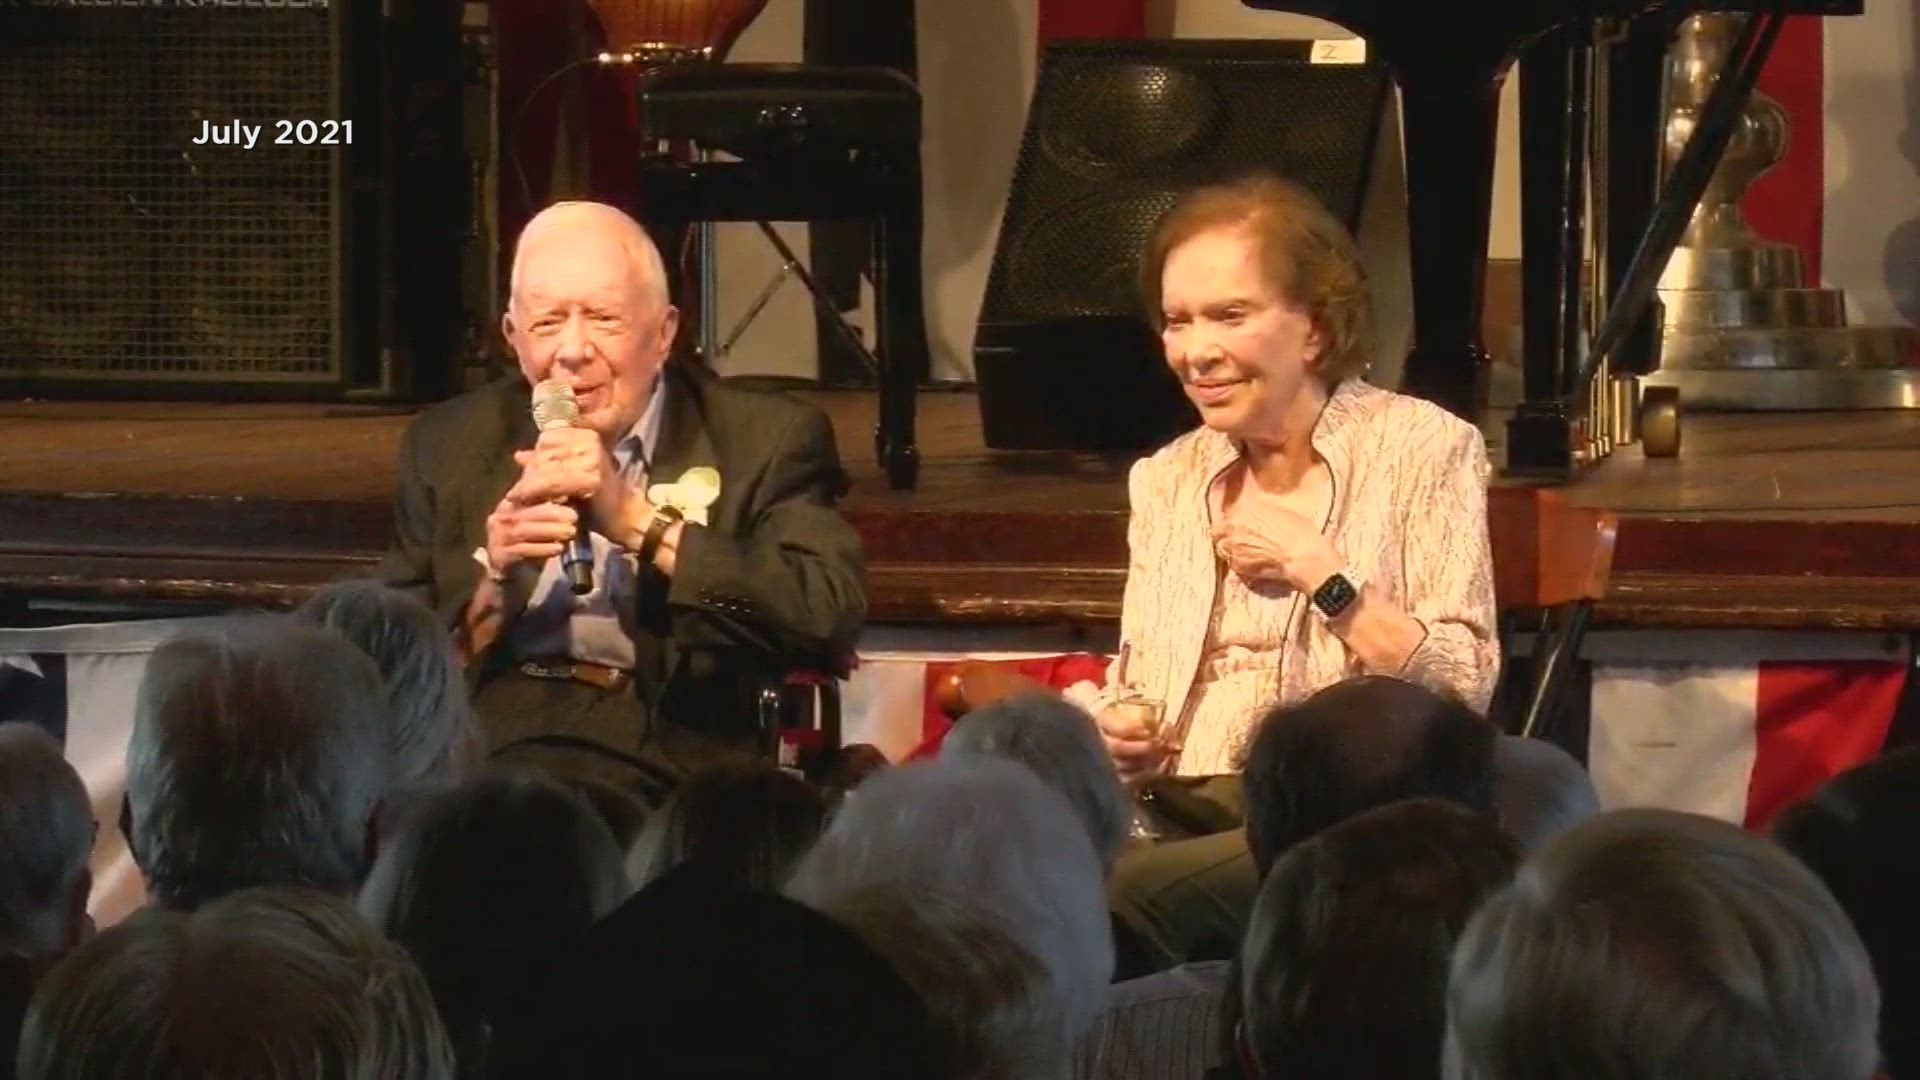 Rosalynn Carter, now 95, remains at home with former President Jimmy Carter, who has been at home receiving hospice care.